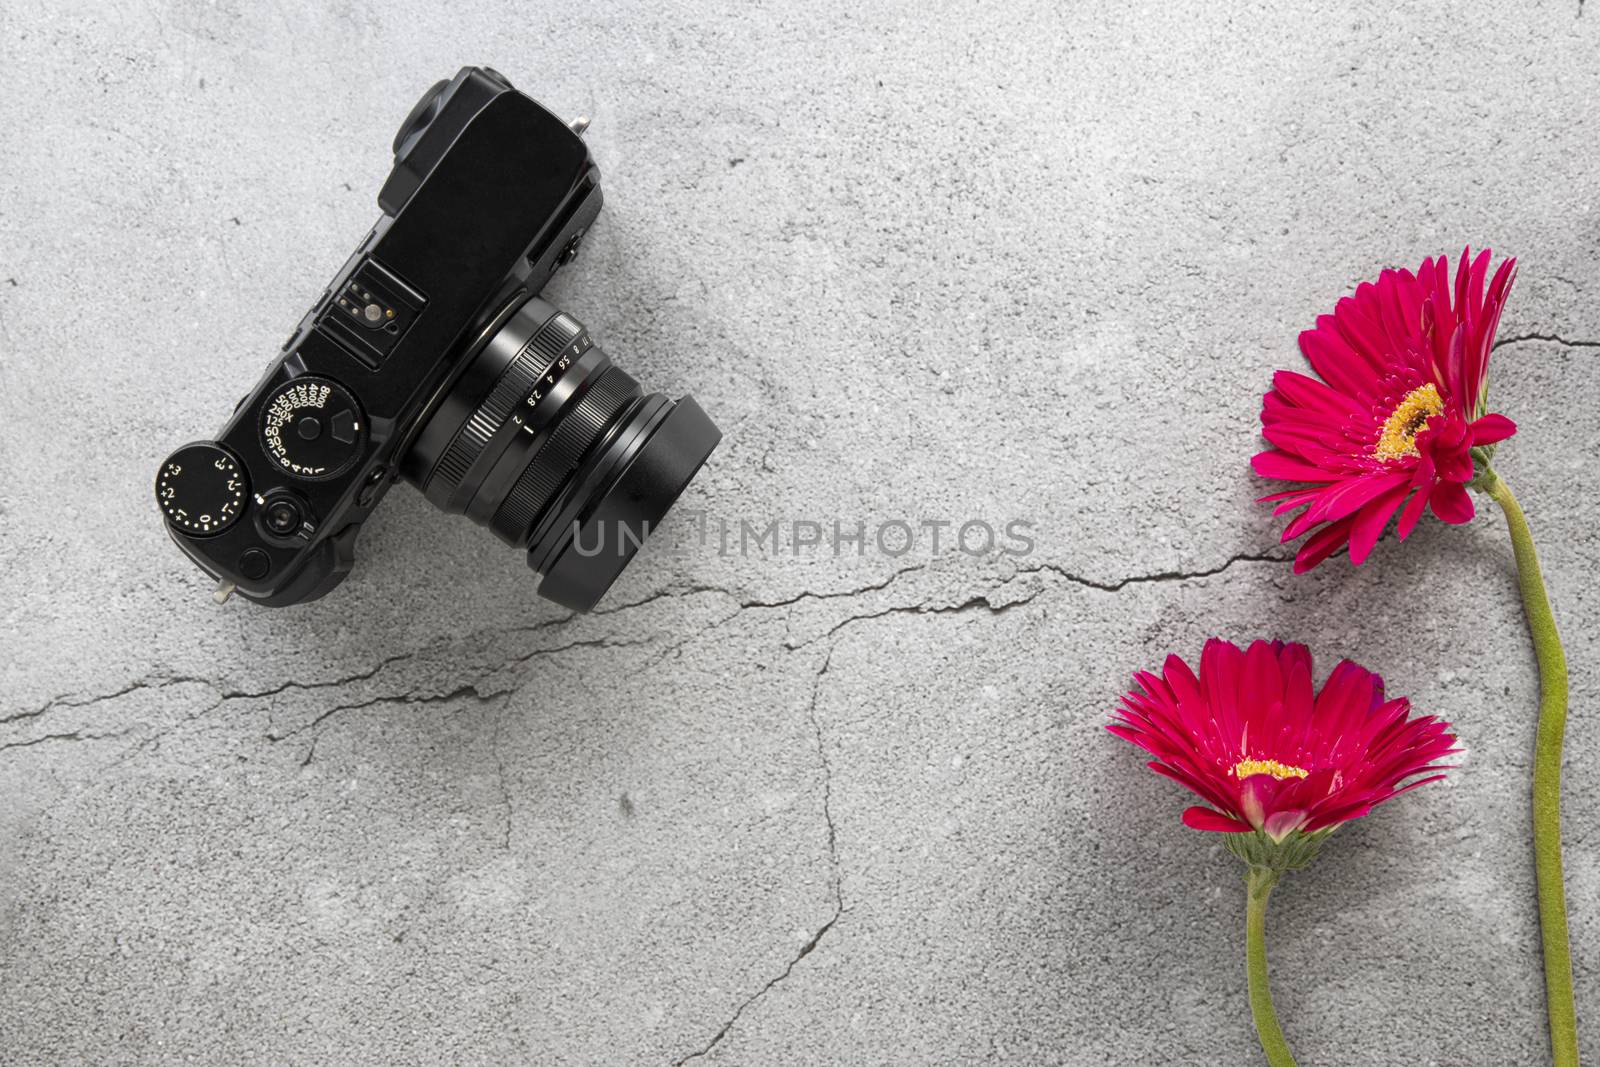 A modern DSLR camera and red gerbera flowers on cracked concrete background. Top view, flat lay design with copy space.